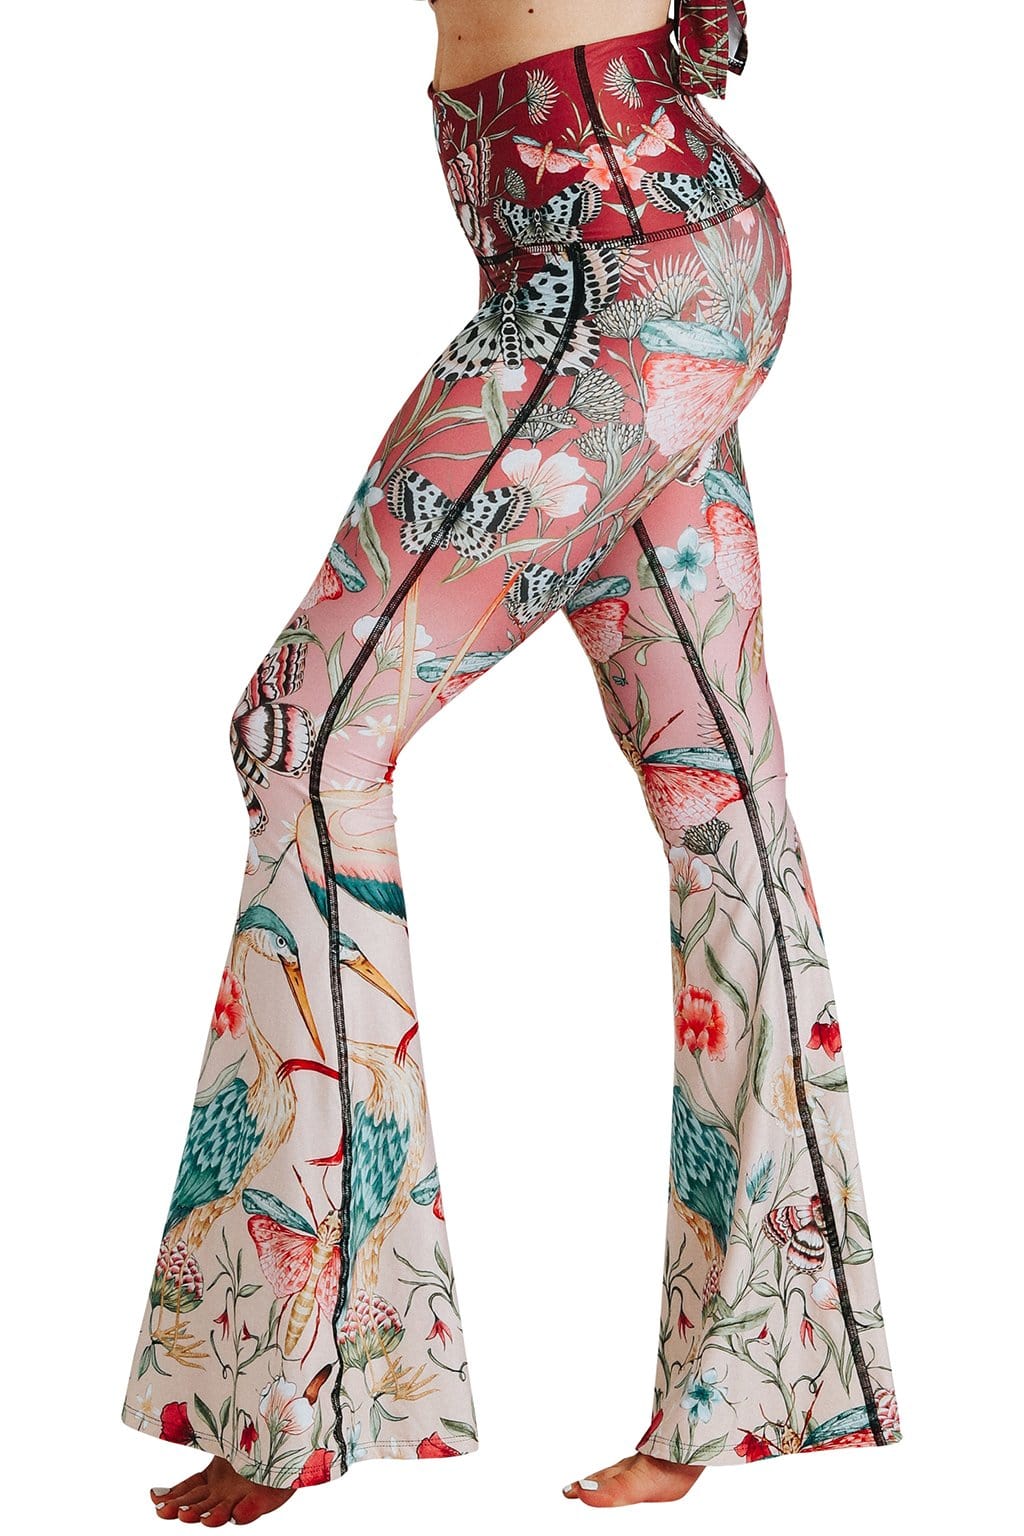  Womens Print High Waisted Flare Pants Leggings Bell Bottom  Wide Leg Lounge Pants Trousers Multicoloured Floral Print XS